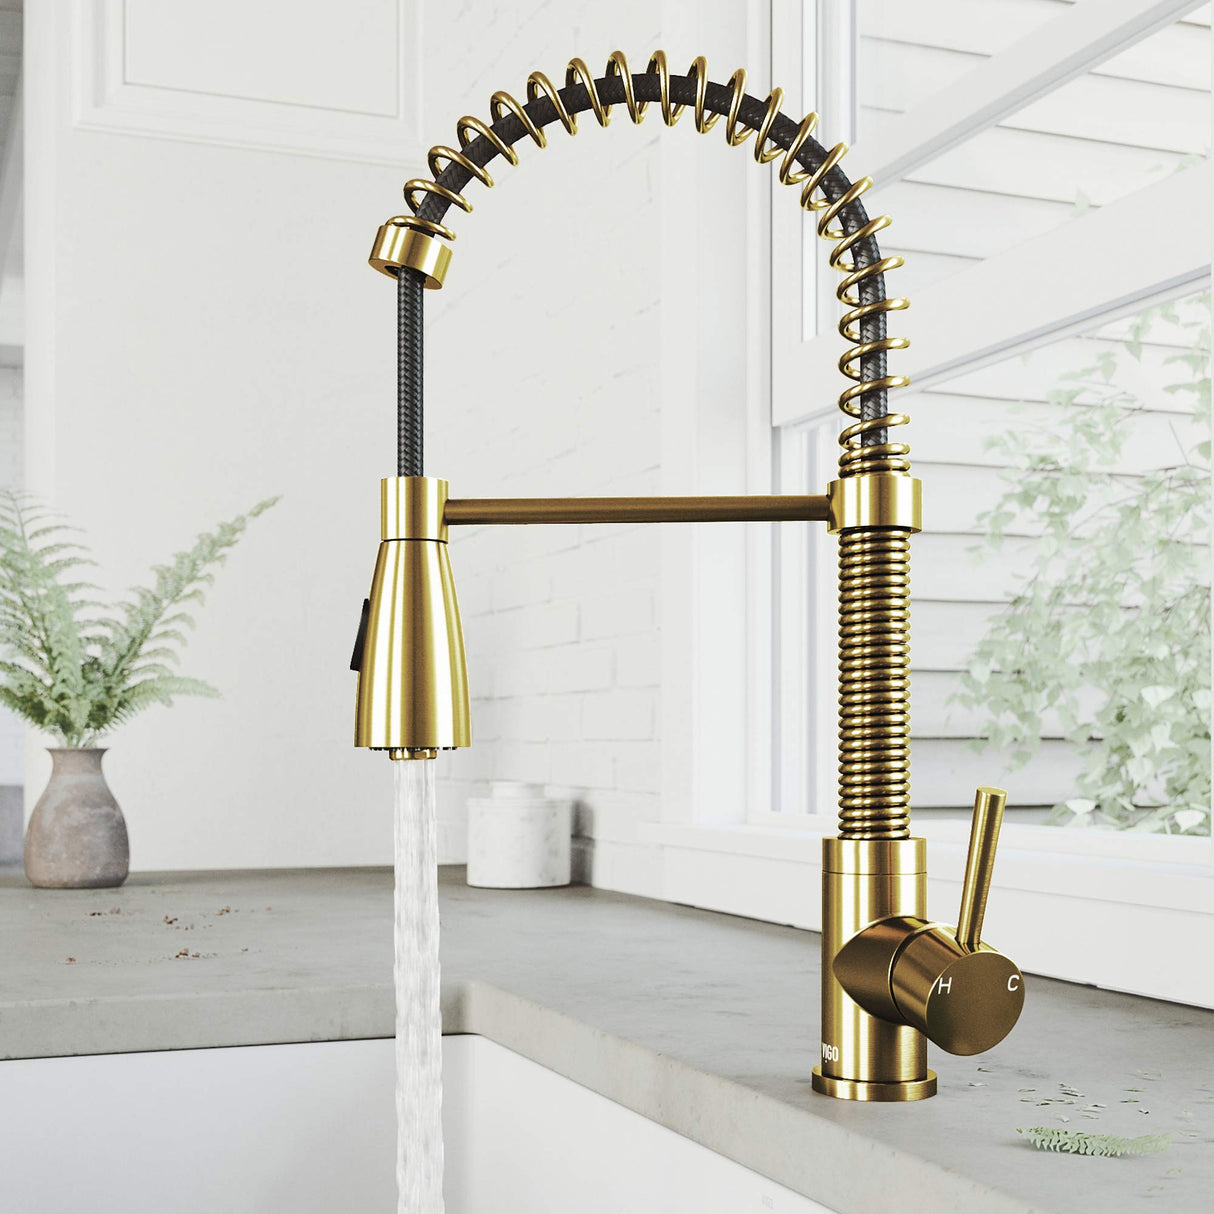 VIGO VG02003MG 19" H Brant Single-Handle with Pull-Down Sprayer Kitchen Faucet in Matte Gold